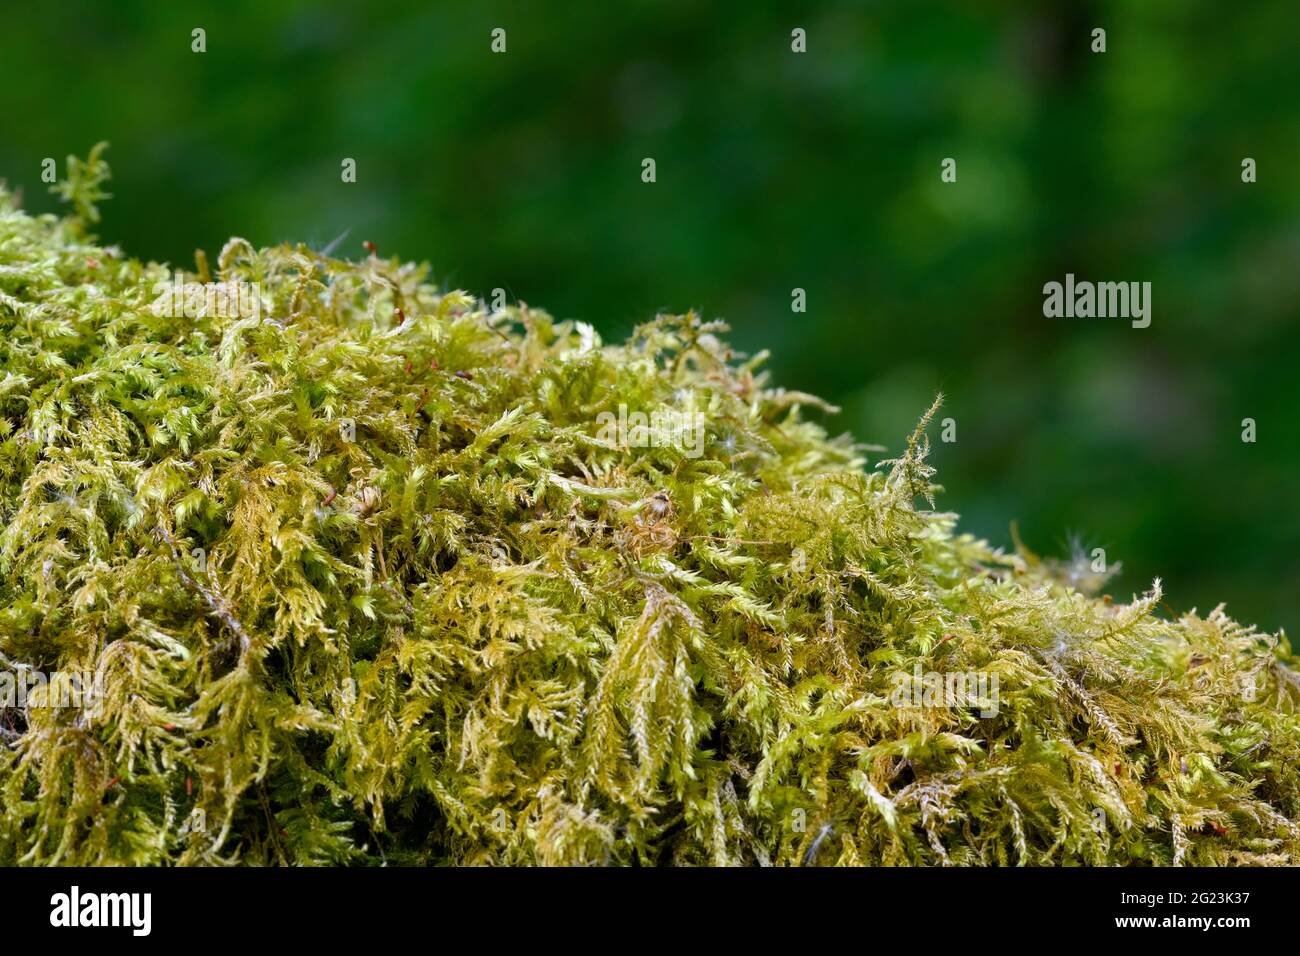 A large amount of a moss species known as Ordinary Moss (Brachythecium rutabulum), growing on a branch. Stock Photo